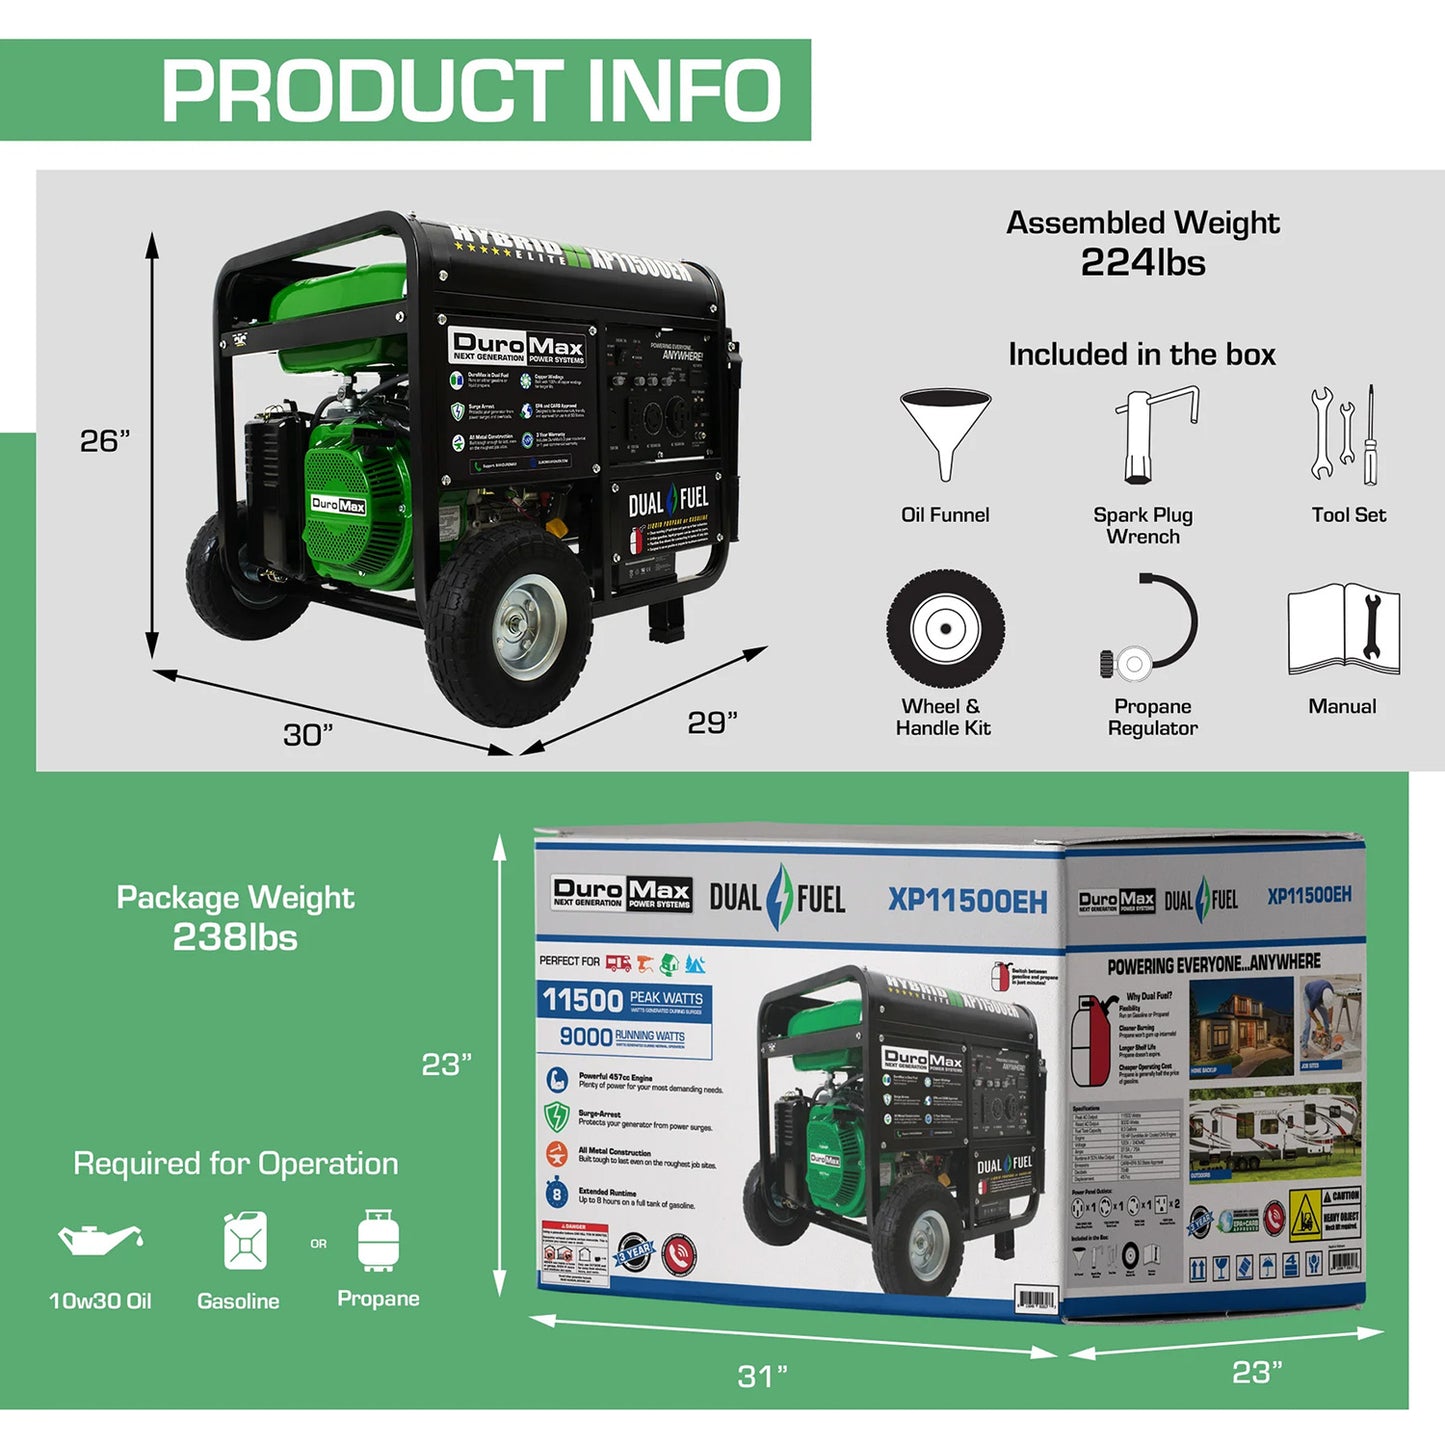 DuroMax XP11500EH Dual Fuel Portable Generator Product Information